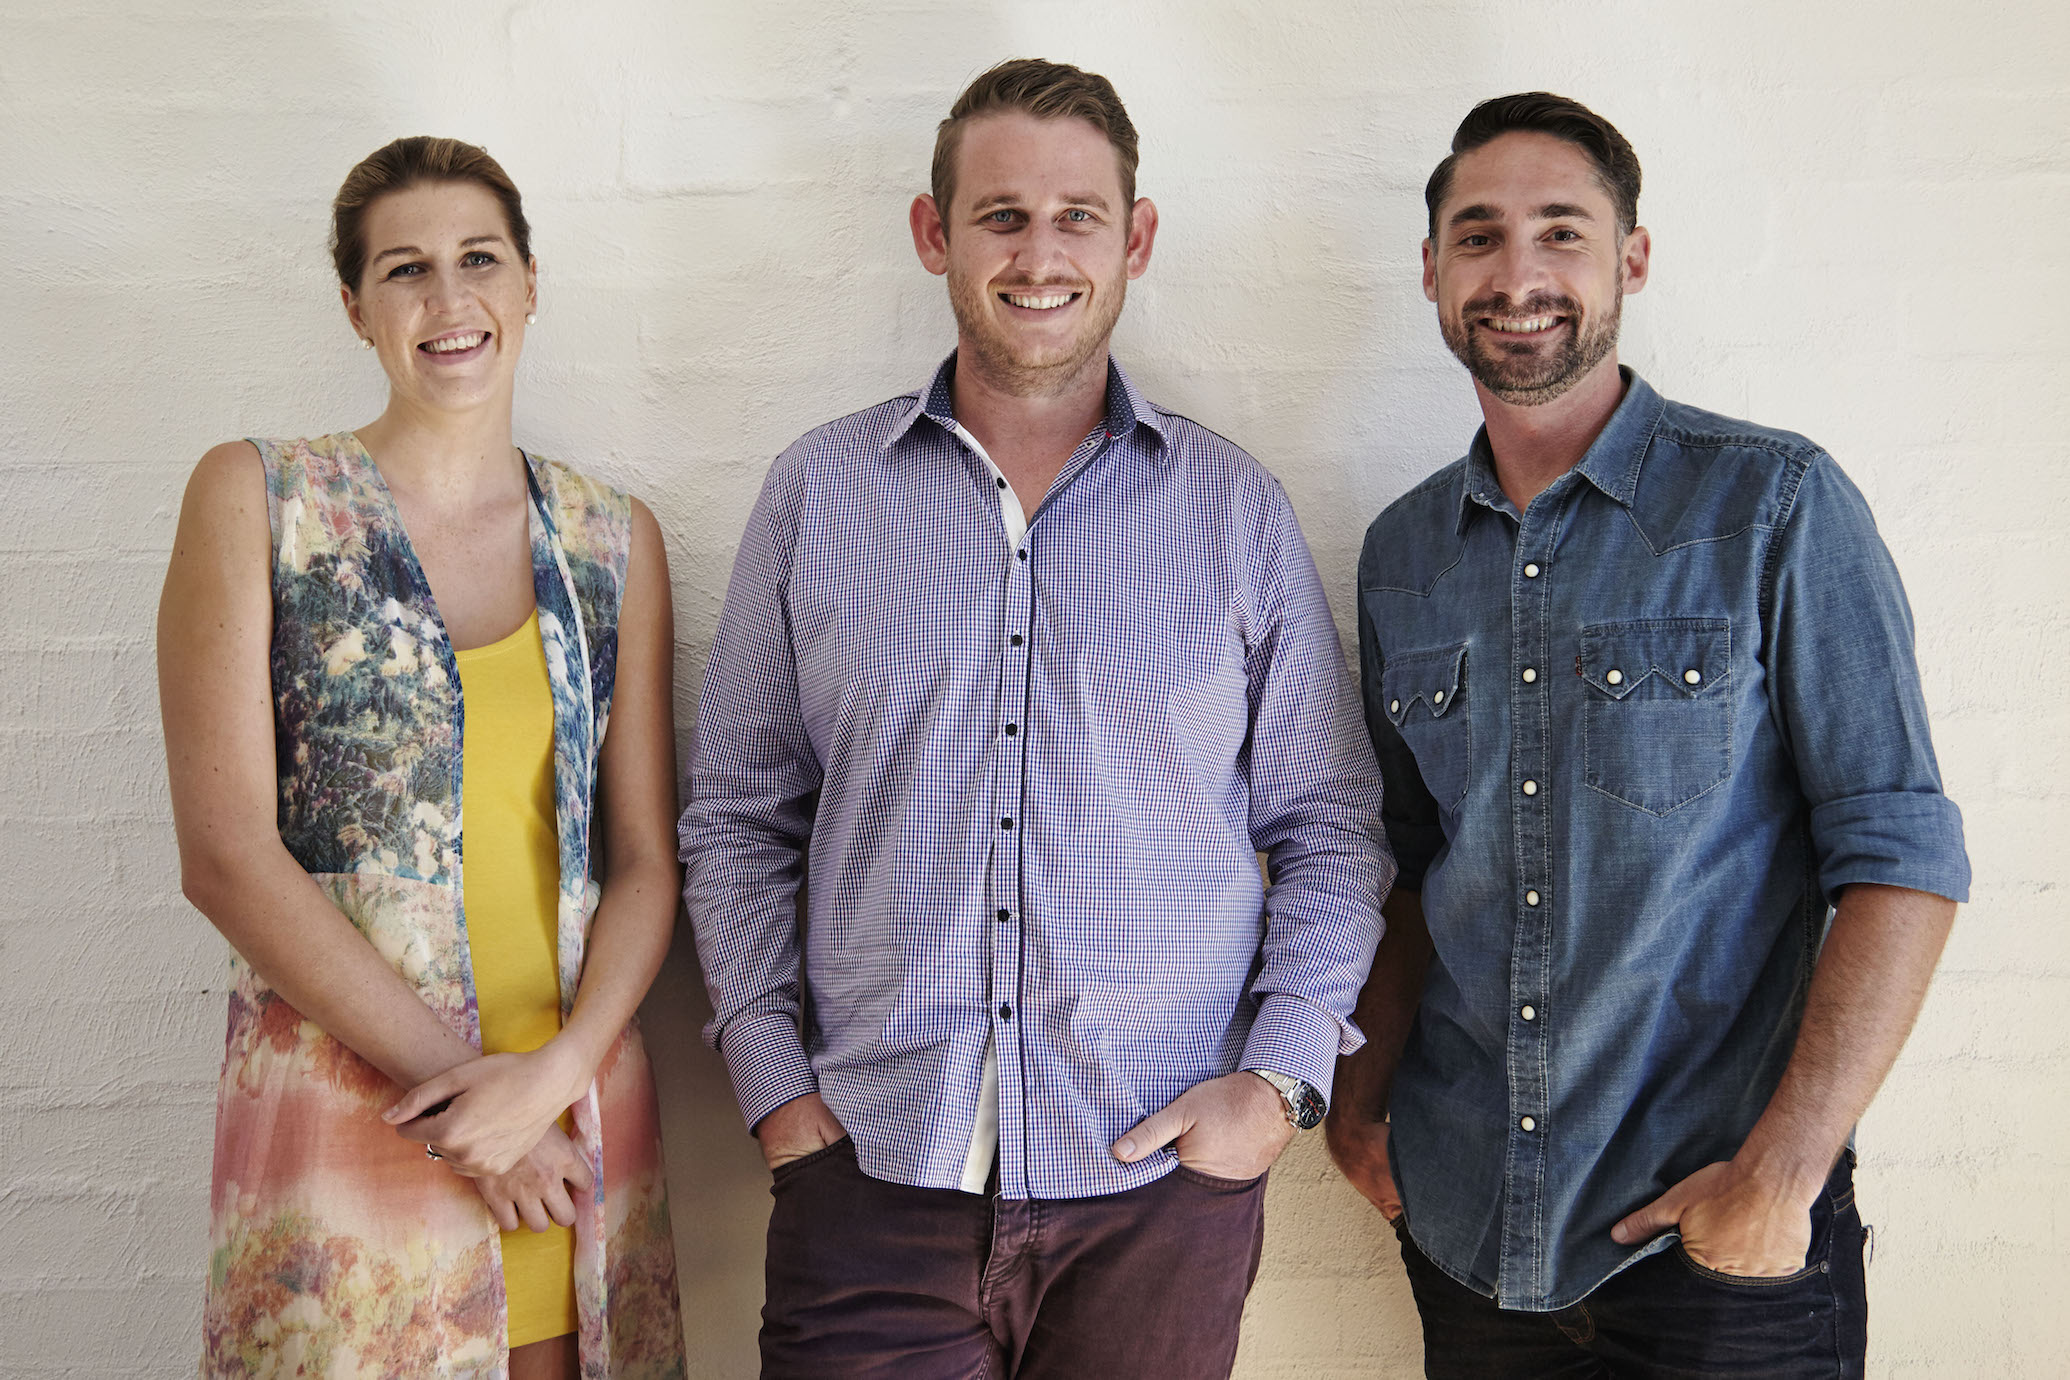 Limehouse Creative Appoints Three New Key Hires